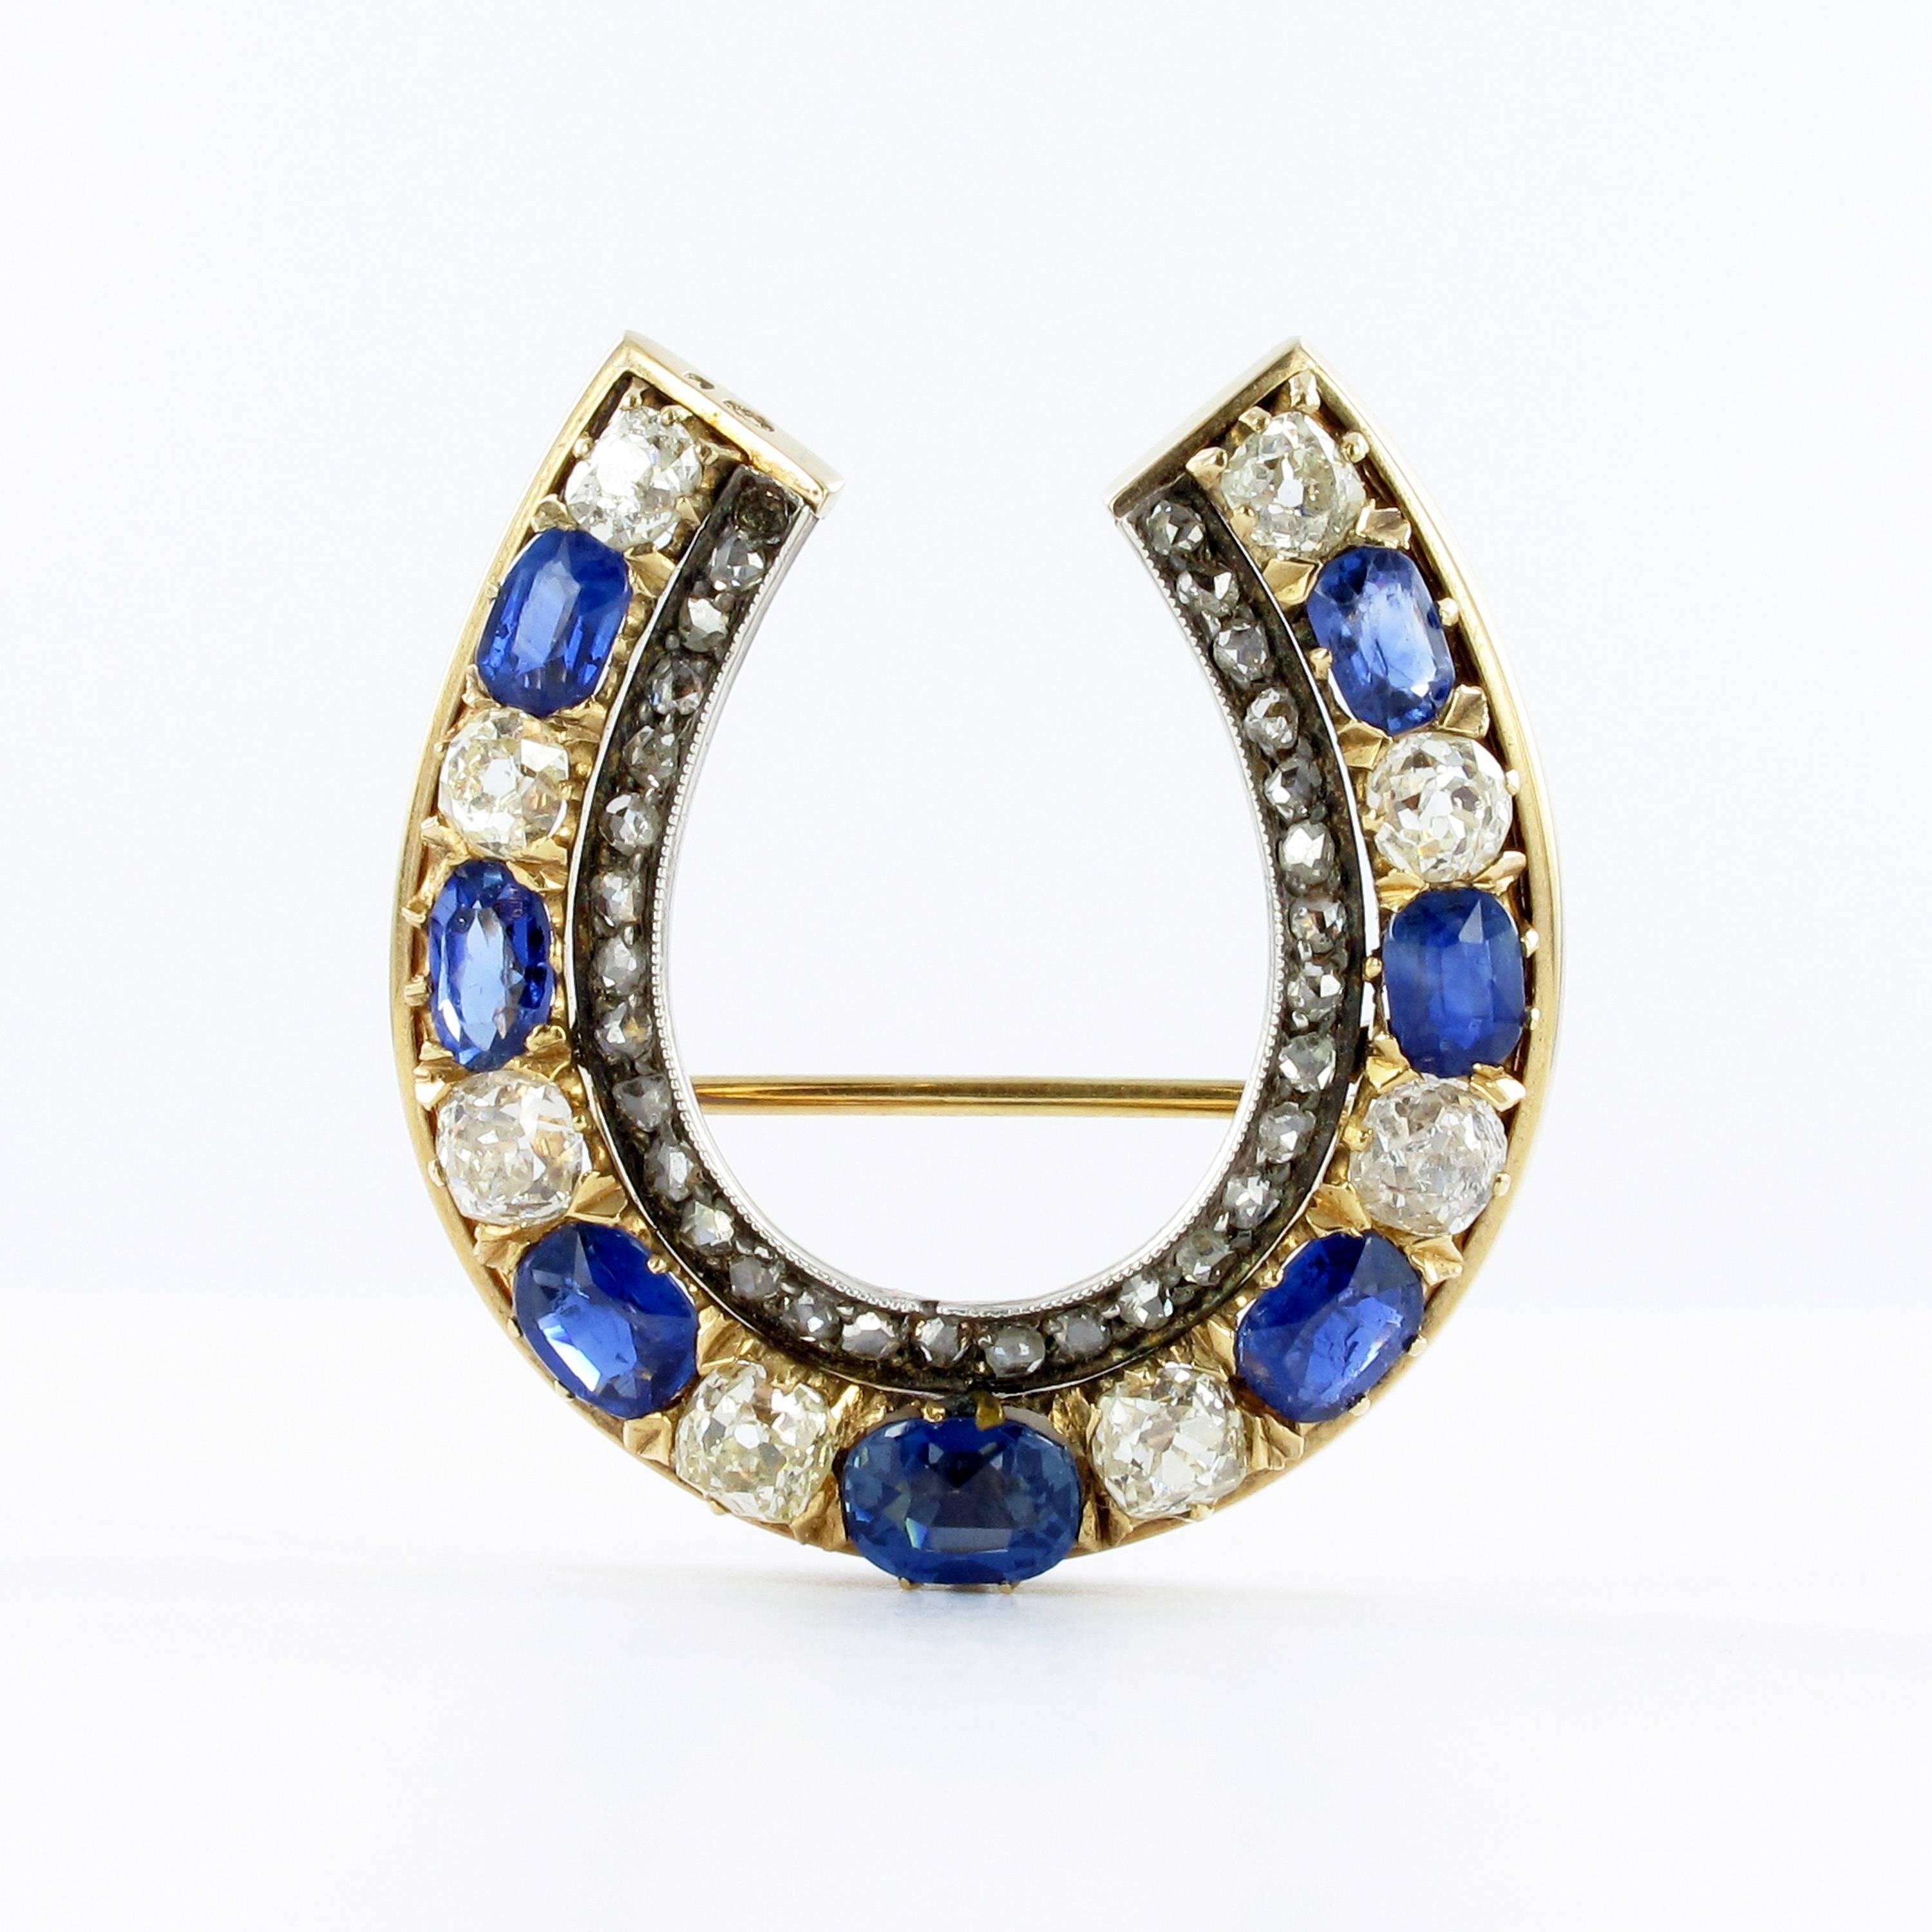 Designed as a horseshoe, this pendant/brooch in 14k yellow gold and silver features seven cushion shape sapphires and eight old mine shape diamonds. Total estimated weight of 4.50 carats for the sapphires and 2.70 carats for the diamonds. Inner